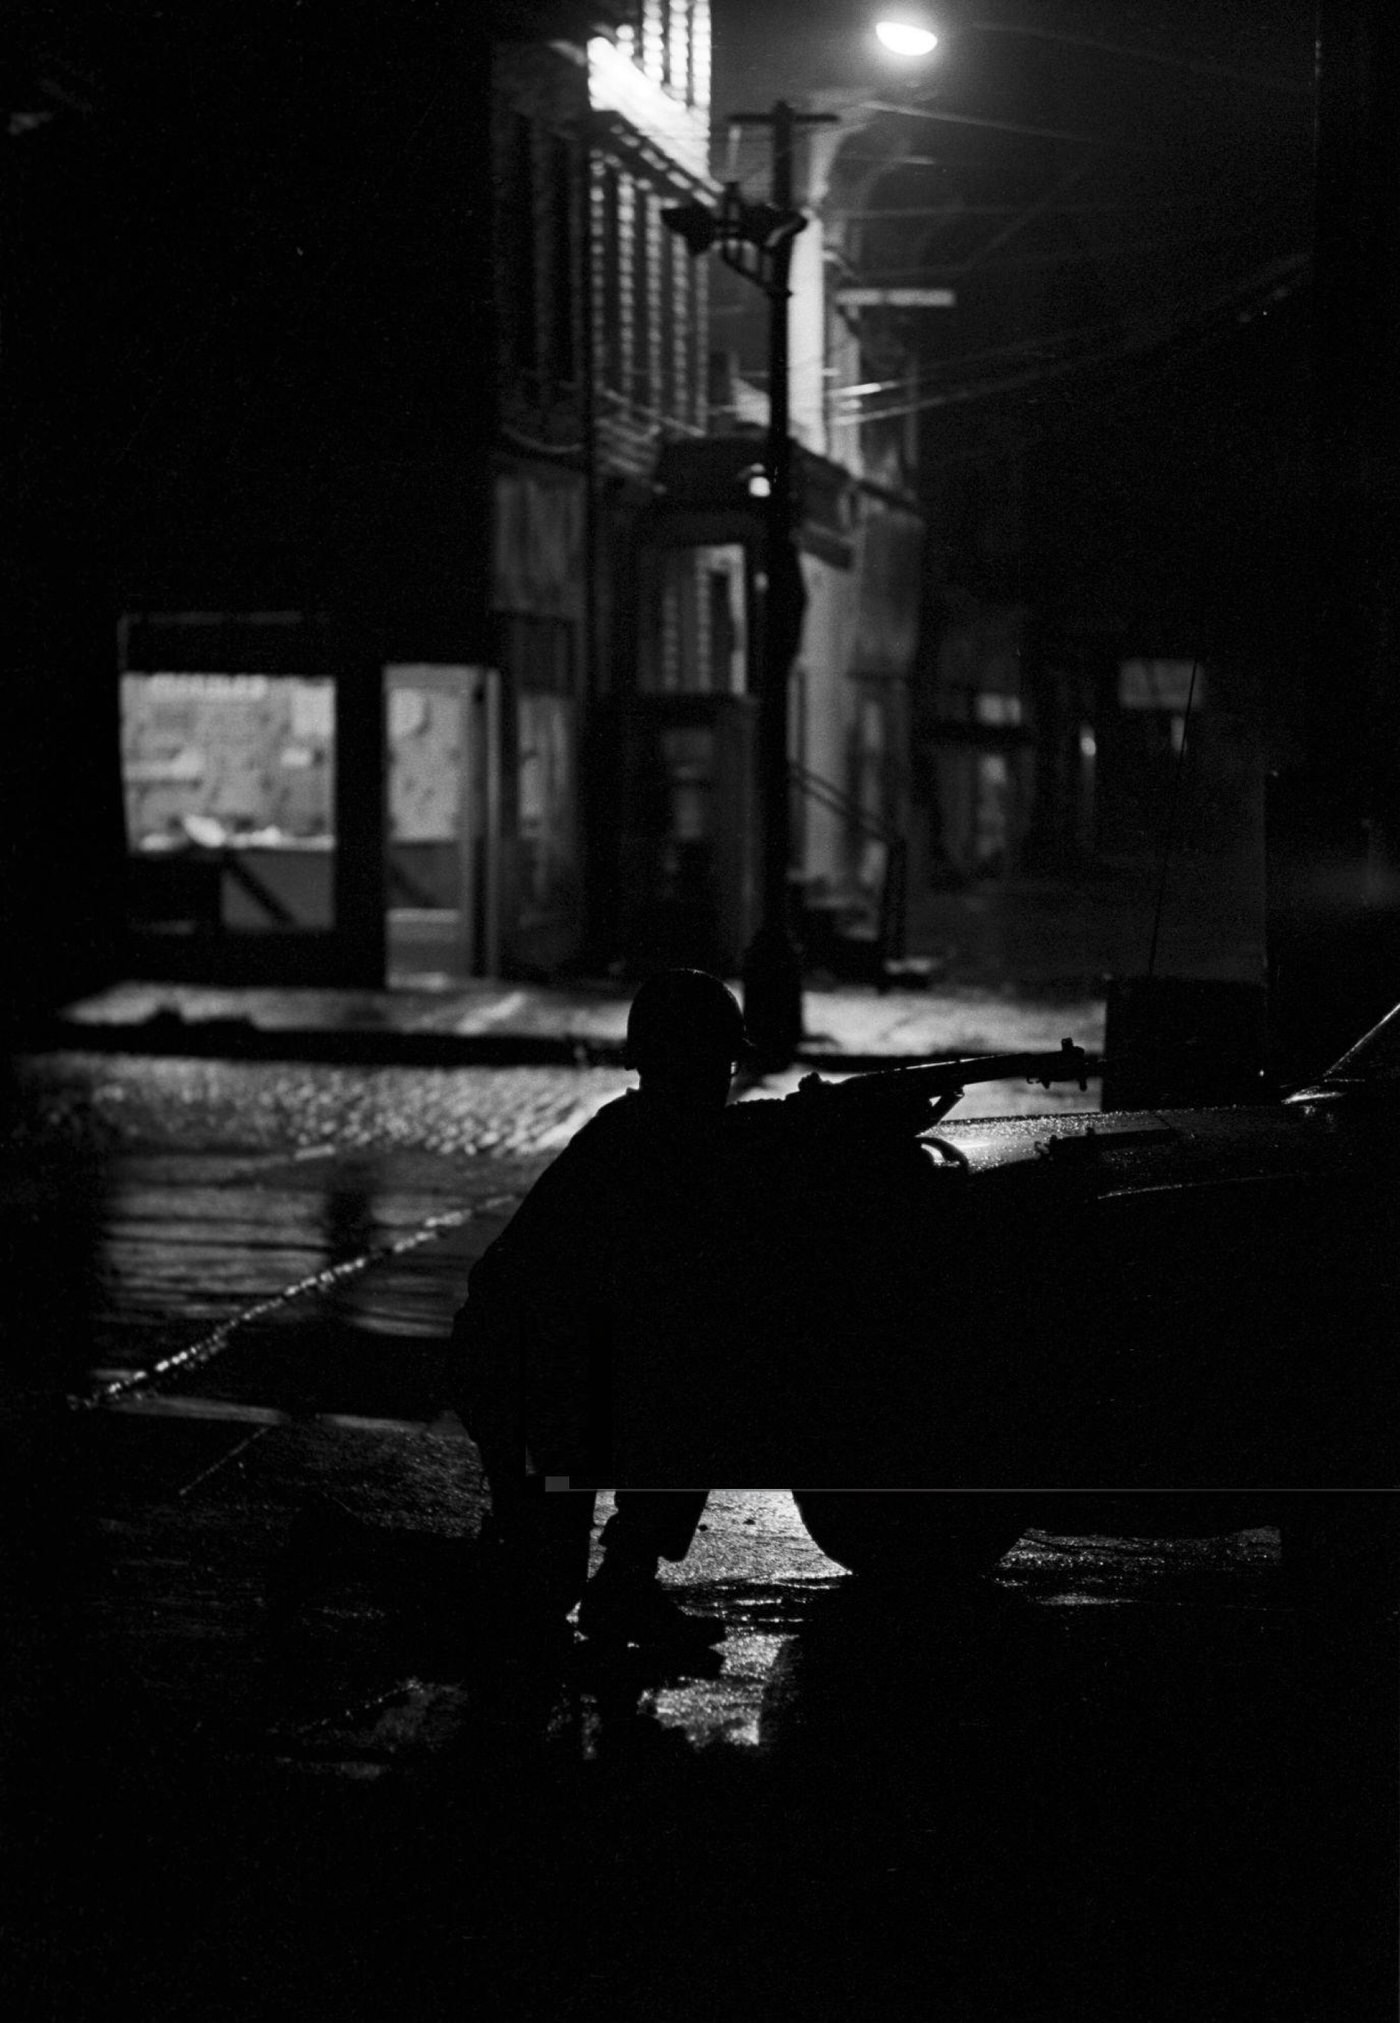 A National Guard soldier crouched behind a car, gun pointed towards the street at night